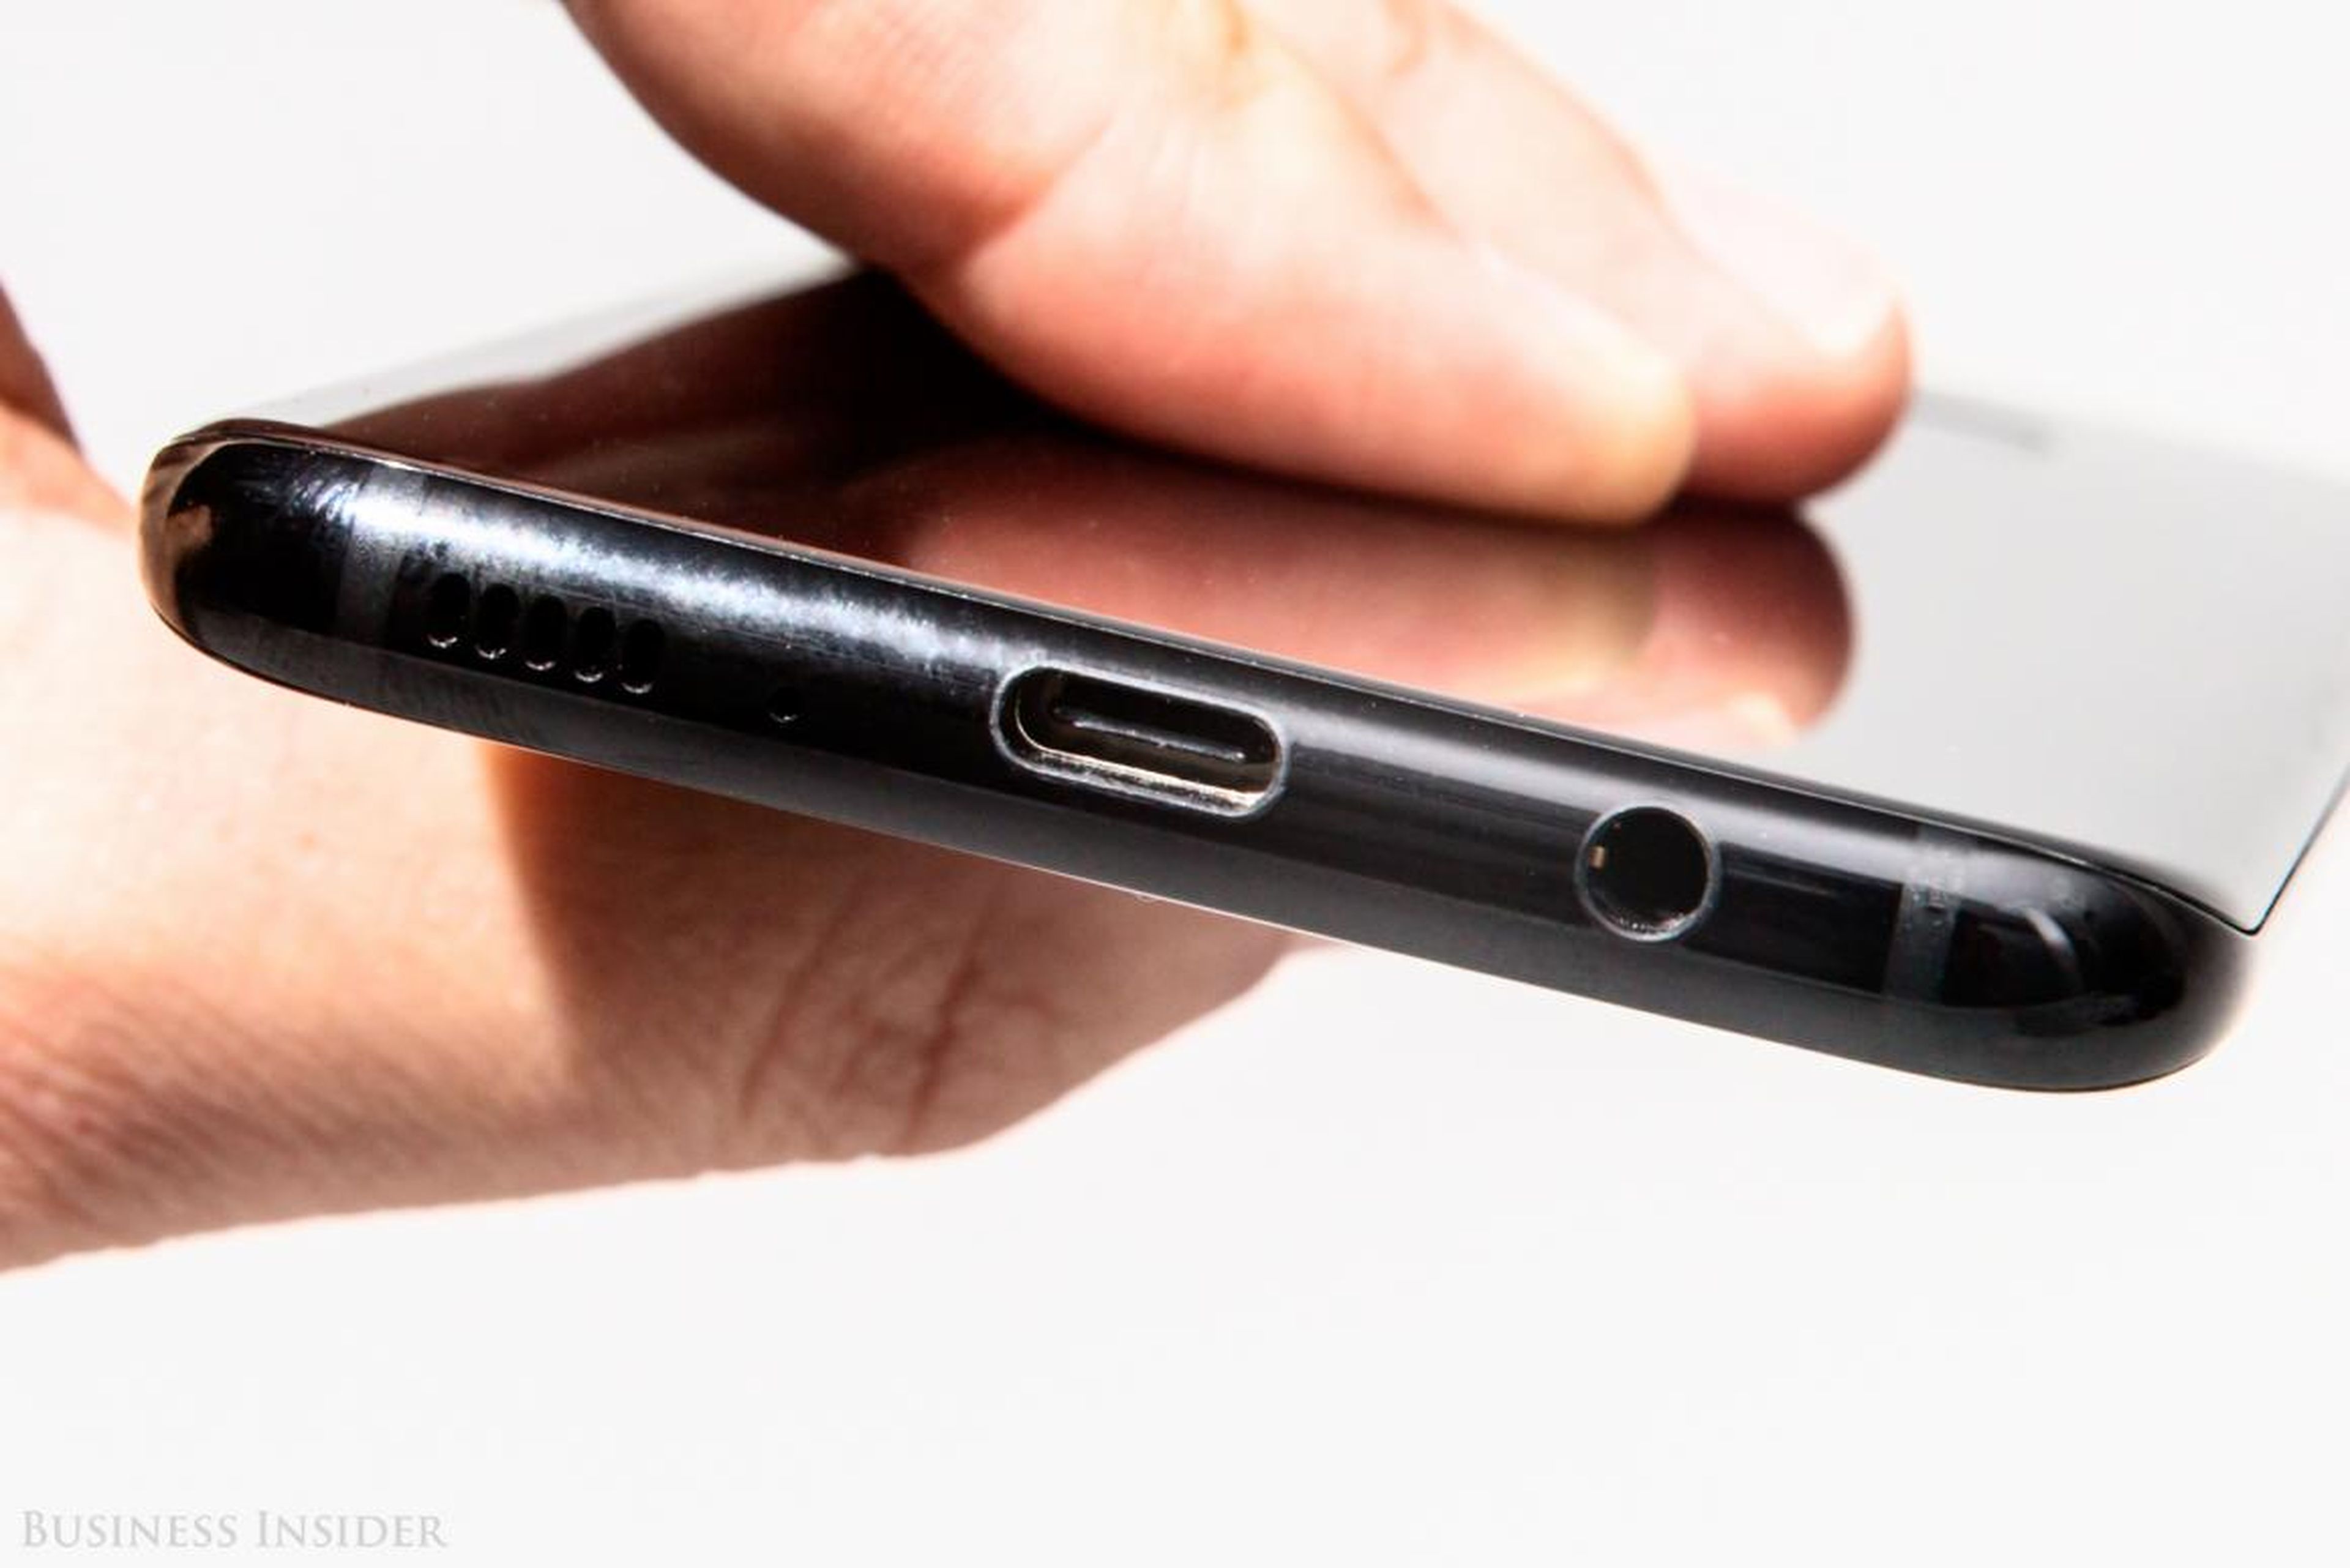 Samsung's Galaxy phones have had USB-C ports for a while.